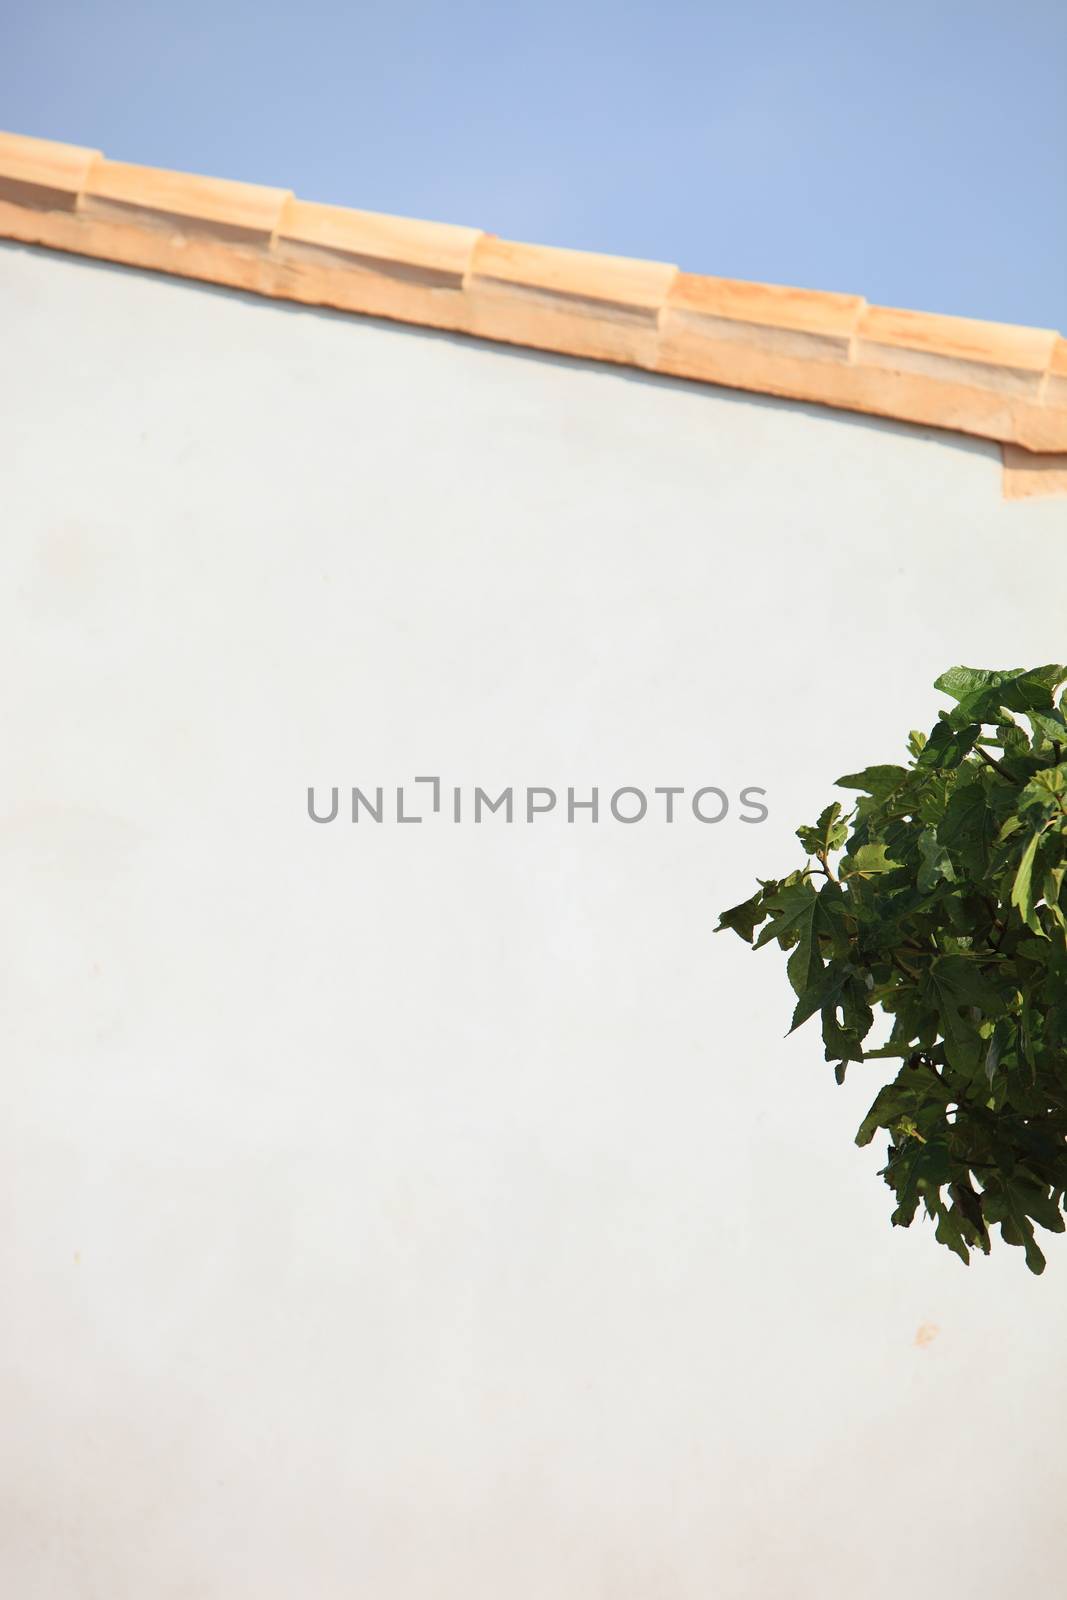 Blank exterior painted white wall of a building with tiles on top and a small green tree under a sunny blue sky with plenty of copyspace for text